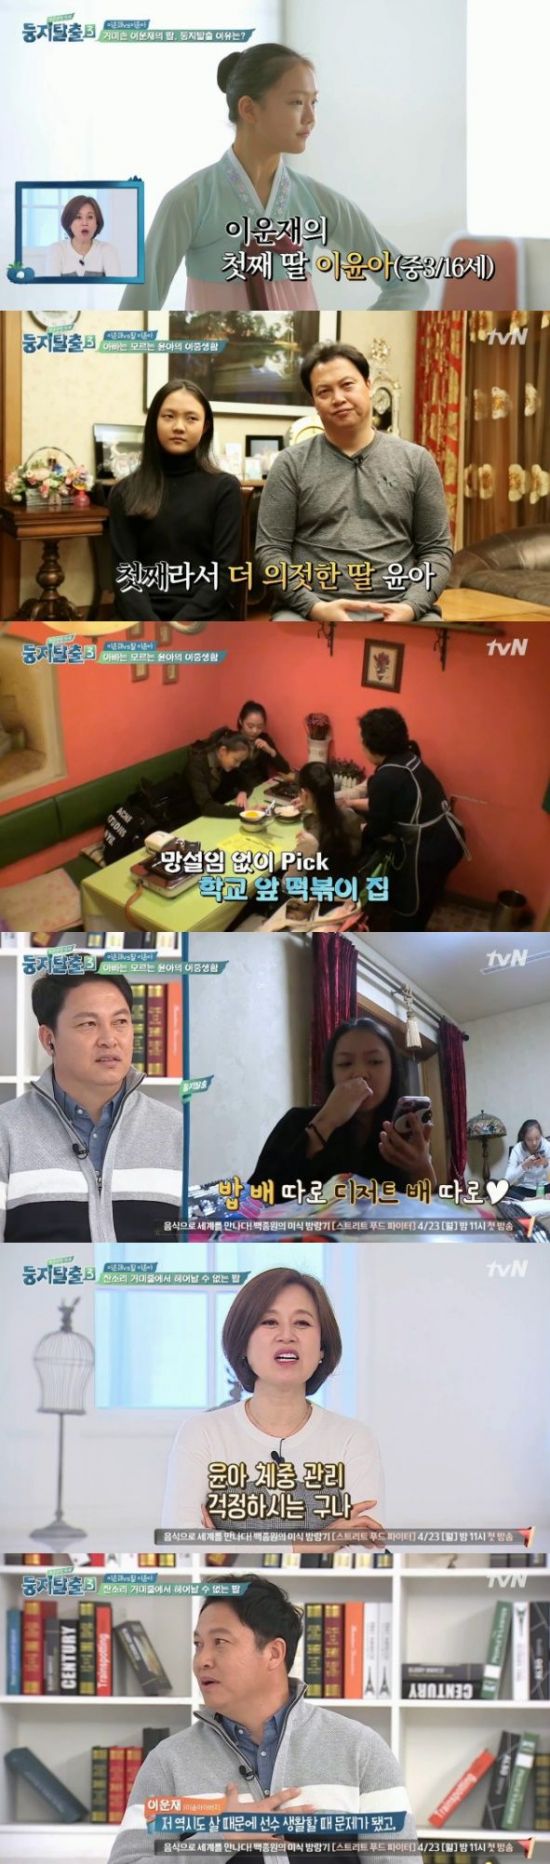 Nest Escape 3 Lee, Won Jae stole a daughter Yoona storm.On cable TV tvN entertainment program Nest Escape 3 on 17th, at the baseball player Hon Son Hoons daughter safflower · Lee, former soccer player Lee, Won Jae daughter is Yoona, child actor Wang Sook-hyun, actor Pan · Uni son He appeared Gim Du Min.On this day Lee, Won Jae s first daughter Yoona s dual life was released.